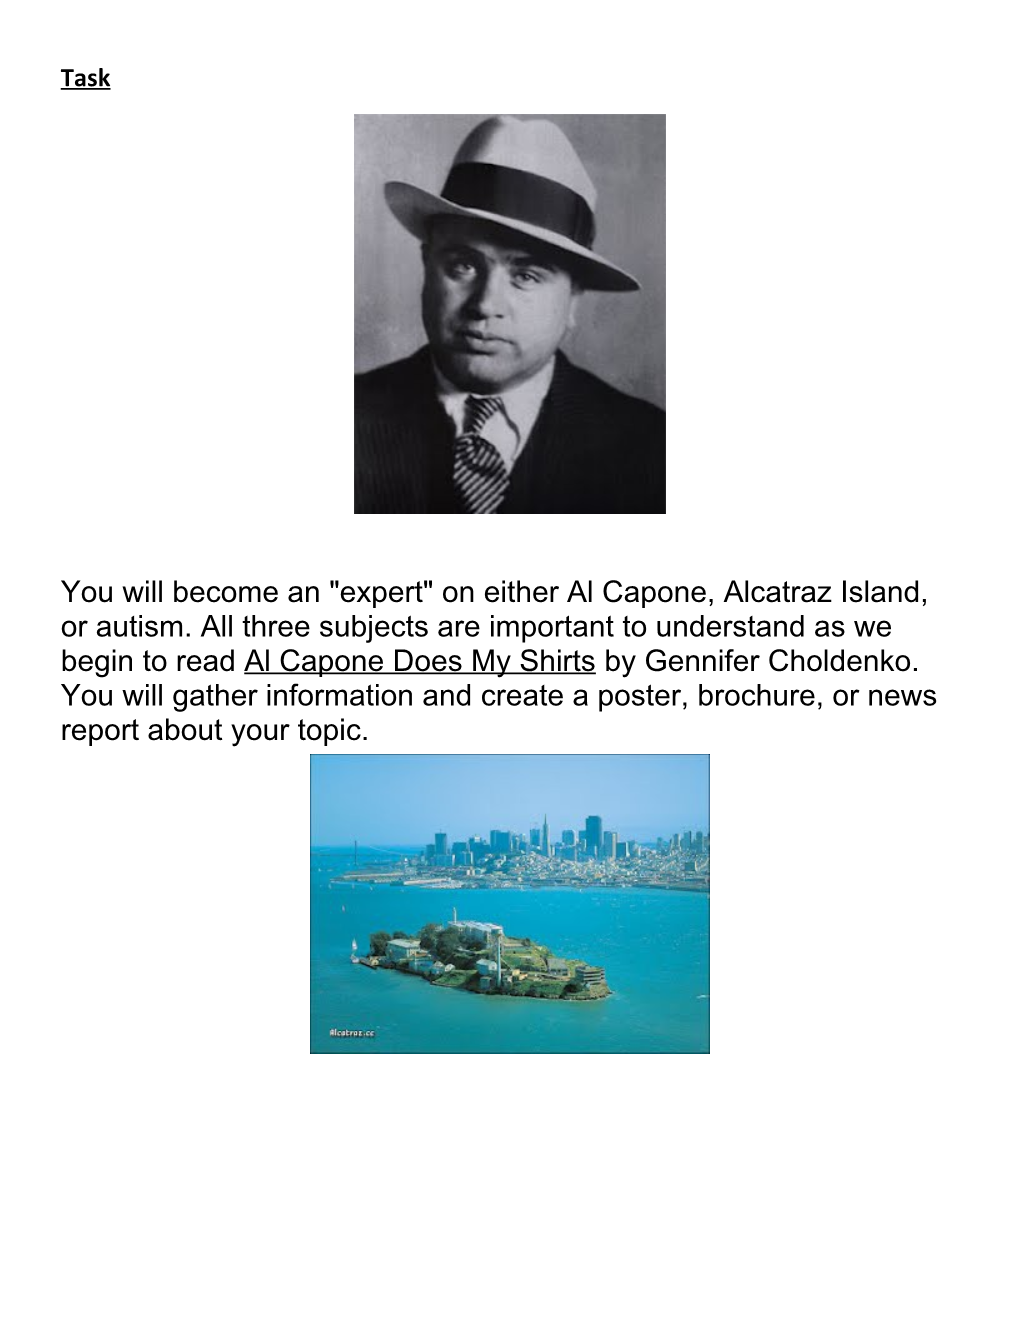 You Will Become an Expert on Either Al Capone, Alcatraz Island, Or Autism. All Three Subjects